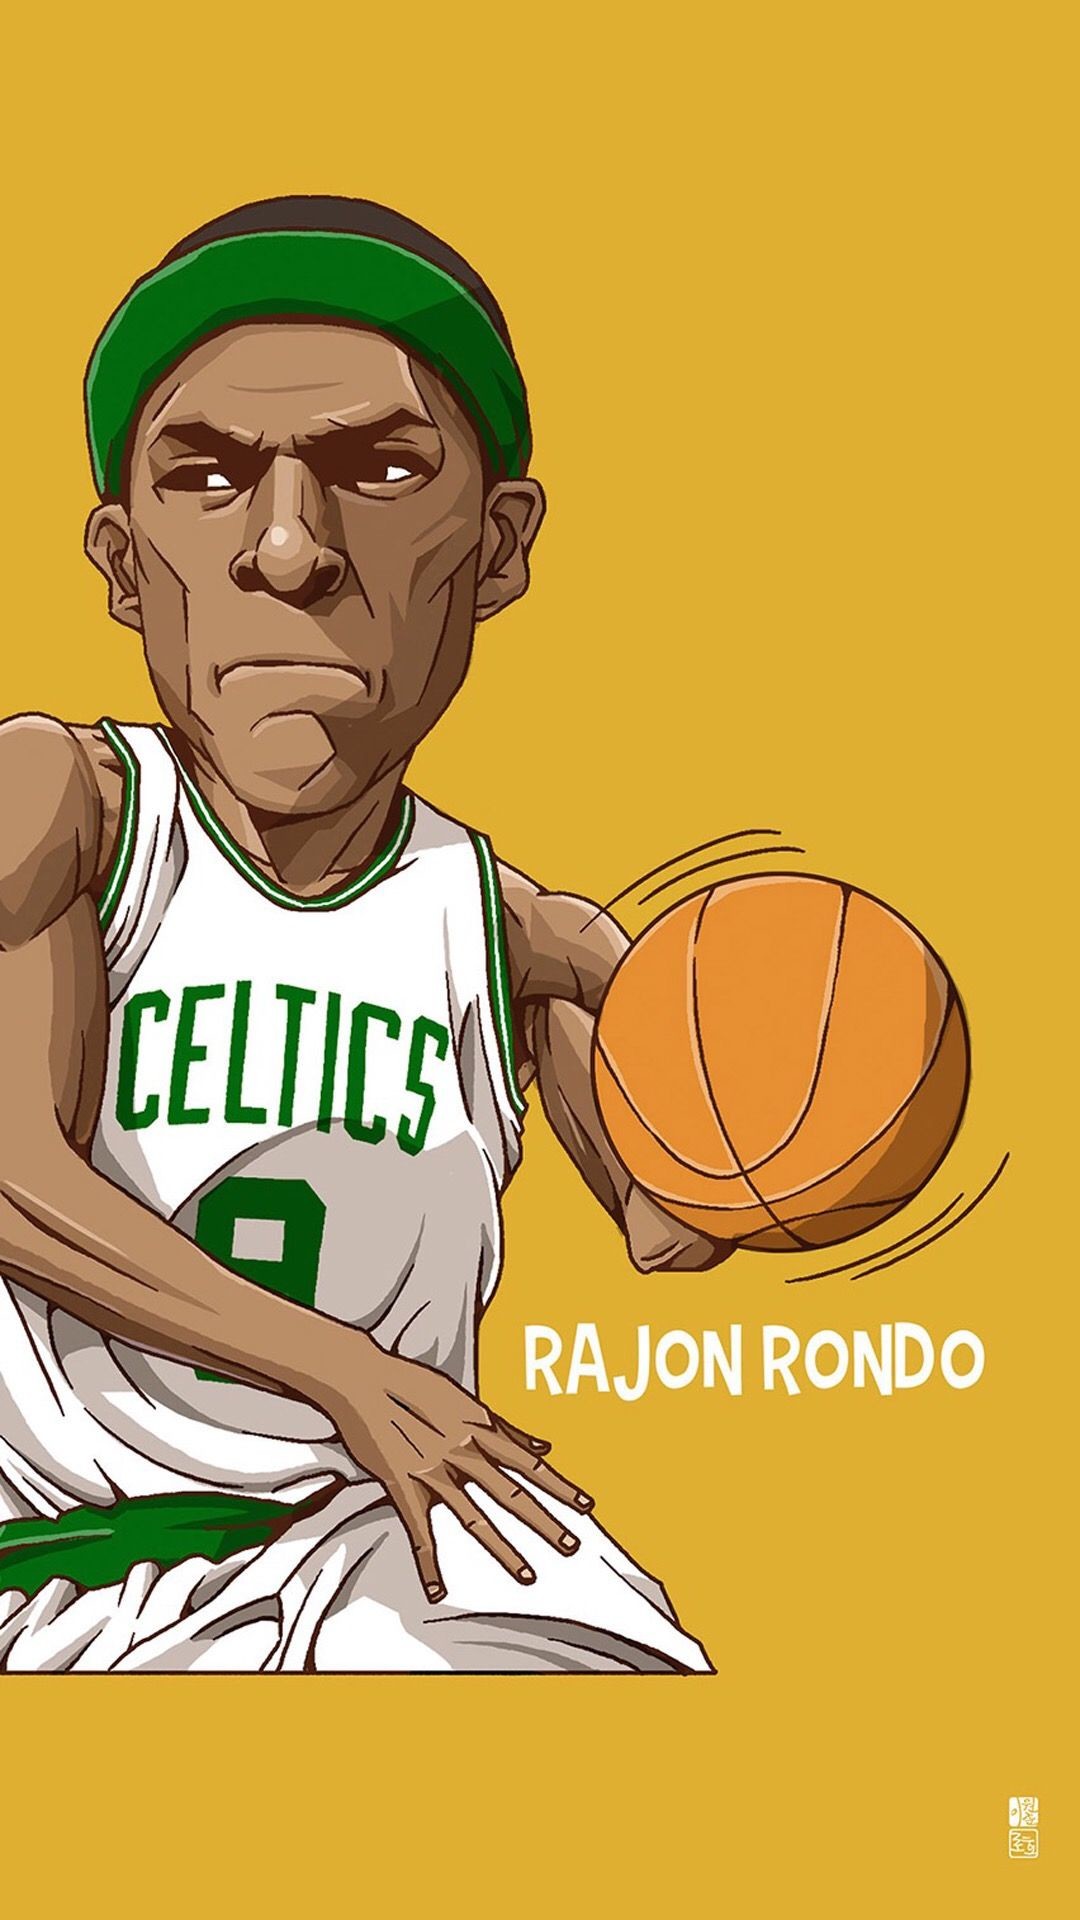 1080x1920 Rajon Rondo. Tap to see Collection of Famous NBA Basketball Players Cute  Cartoon Wallpapers for iPhone. - @mobile9